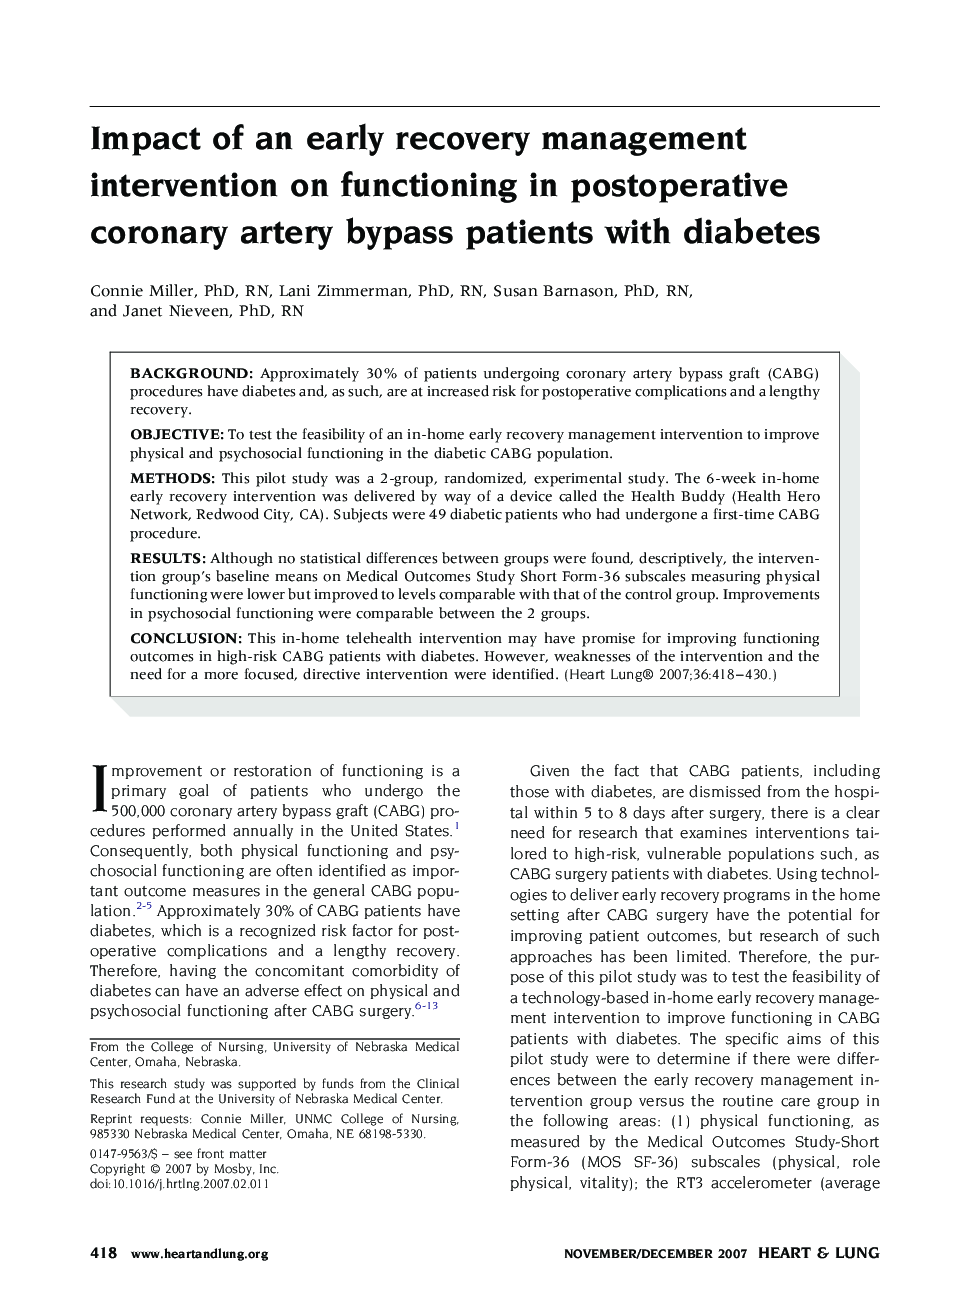 Impact of an early recovery management intervention on functioning in postoperative coronary artery bypass patients with diabetes 